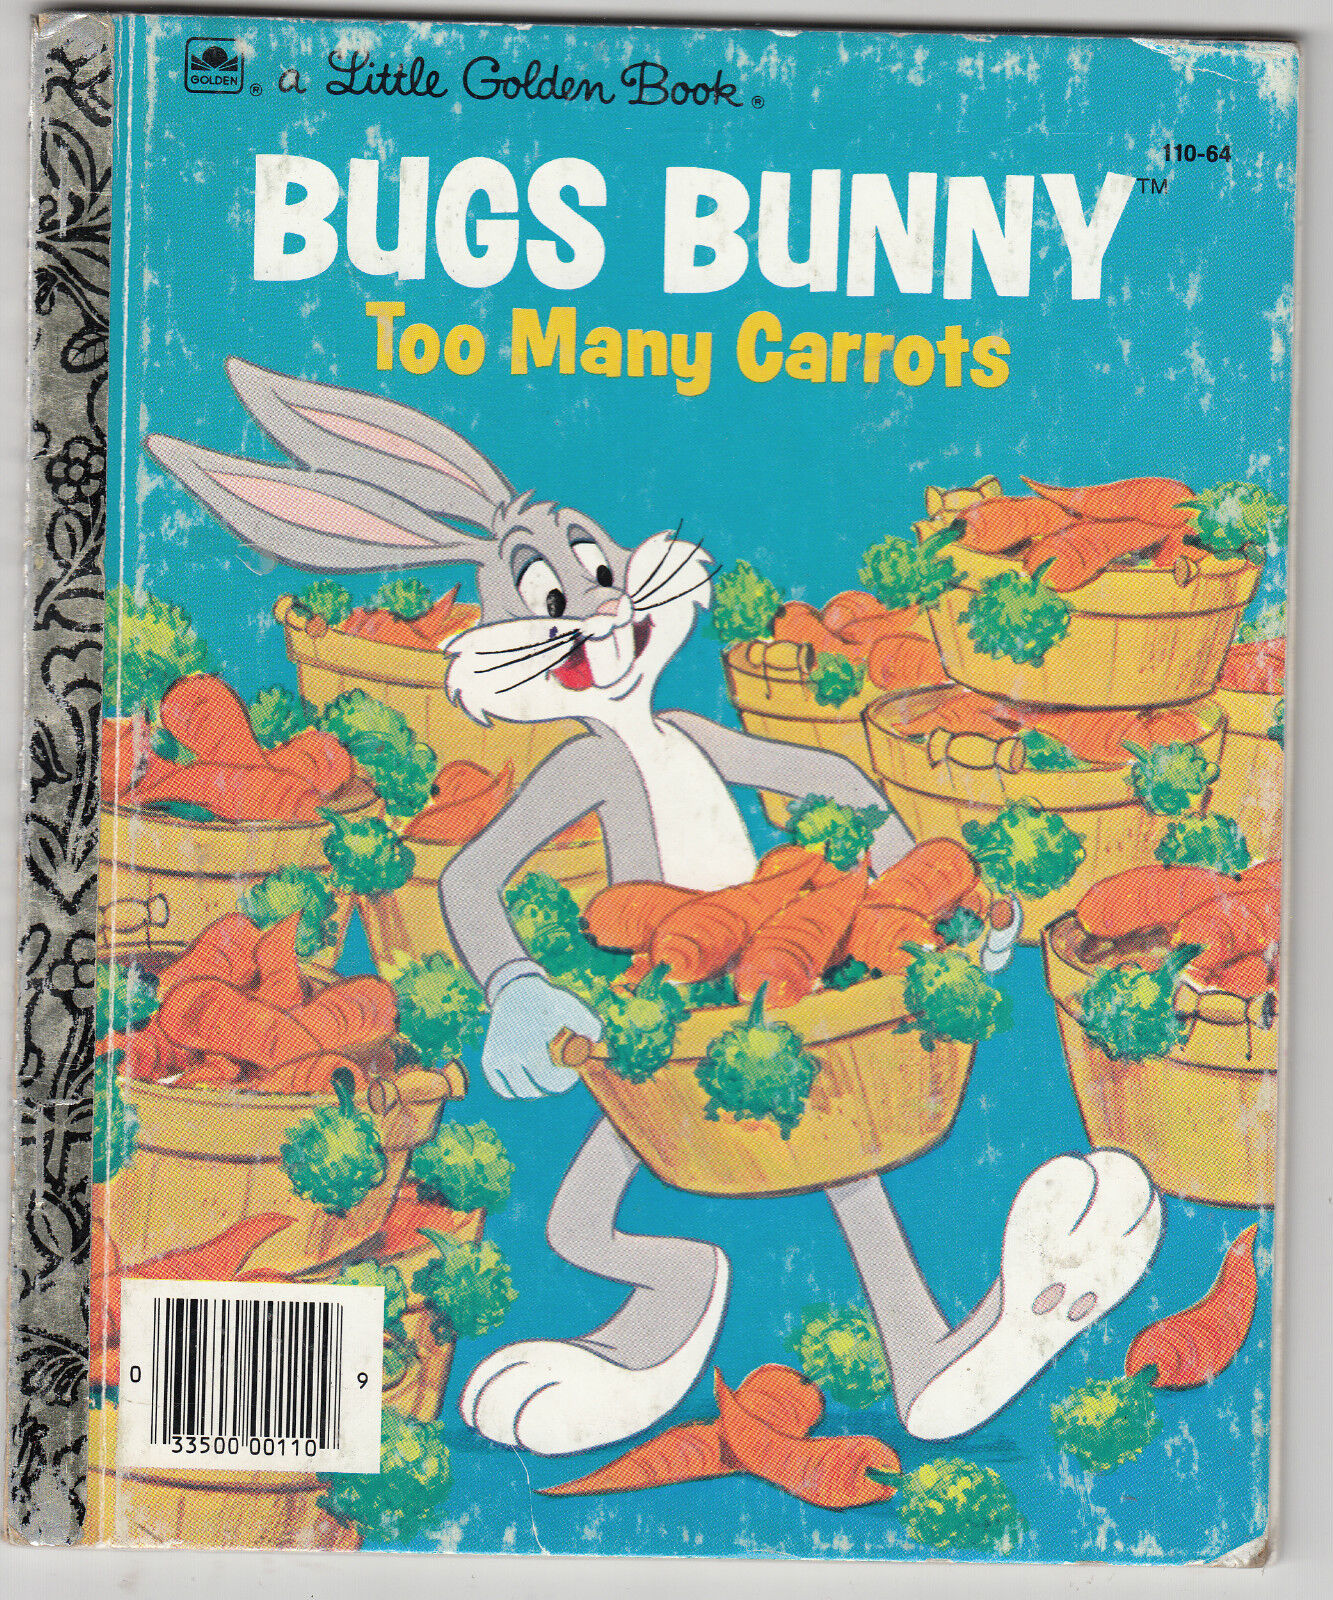 VTG. LITTLE GOLDEN BOOK HC BUGS BUNNY Too Many Carrots by JEAN LEWIS 110-64 1976